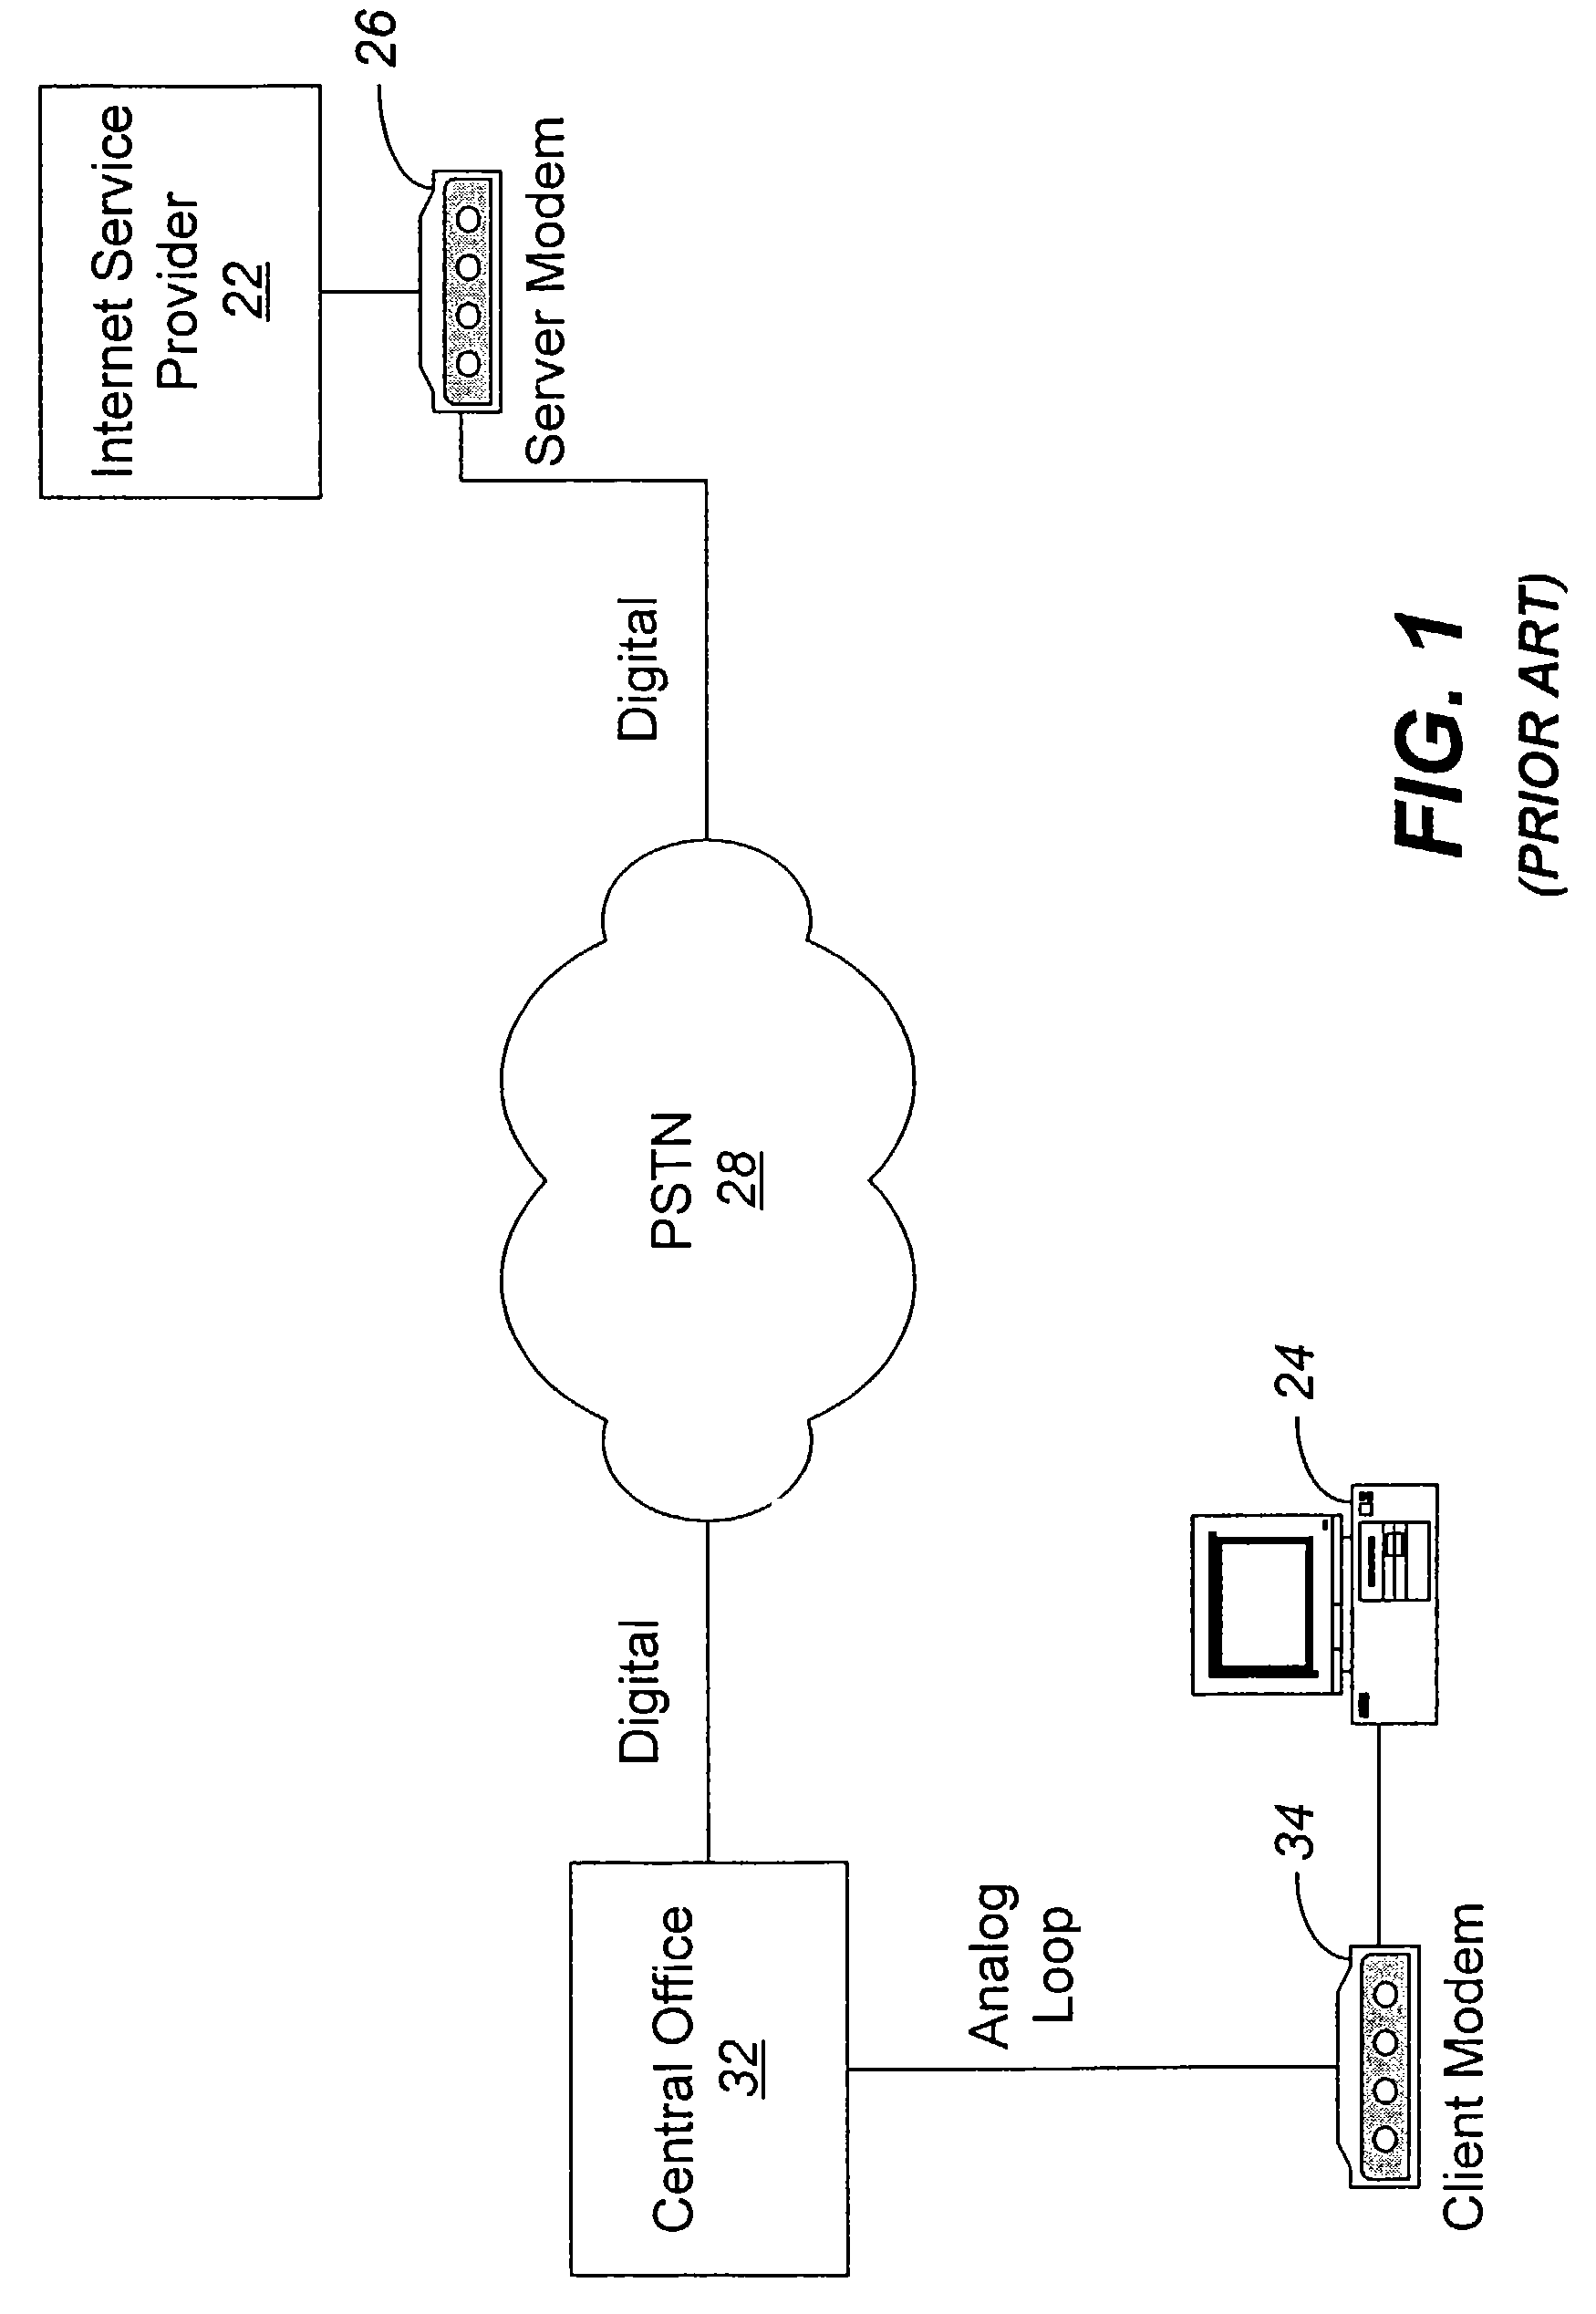 Receivers, methods, and computer program products for an analog modem that receives data signals from a digital modem